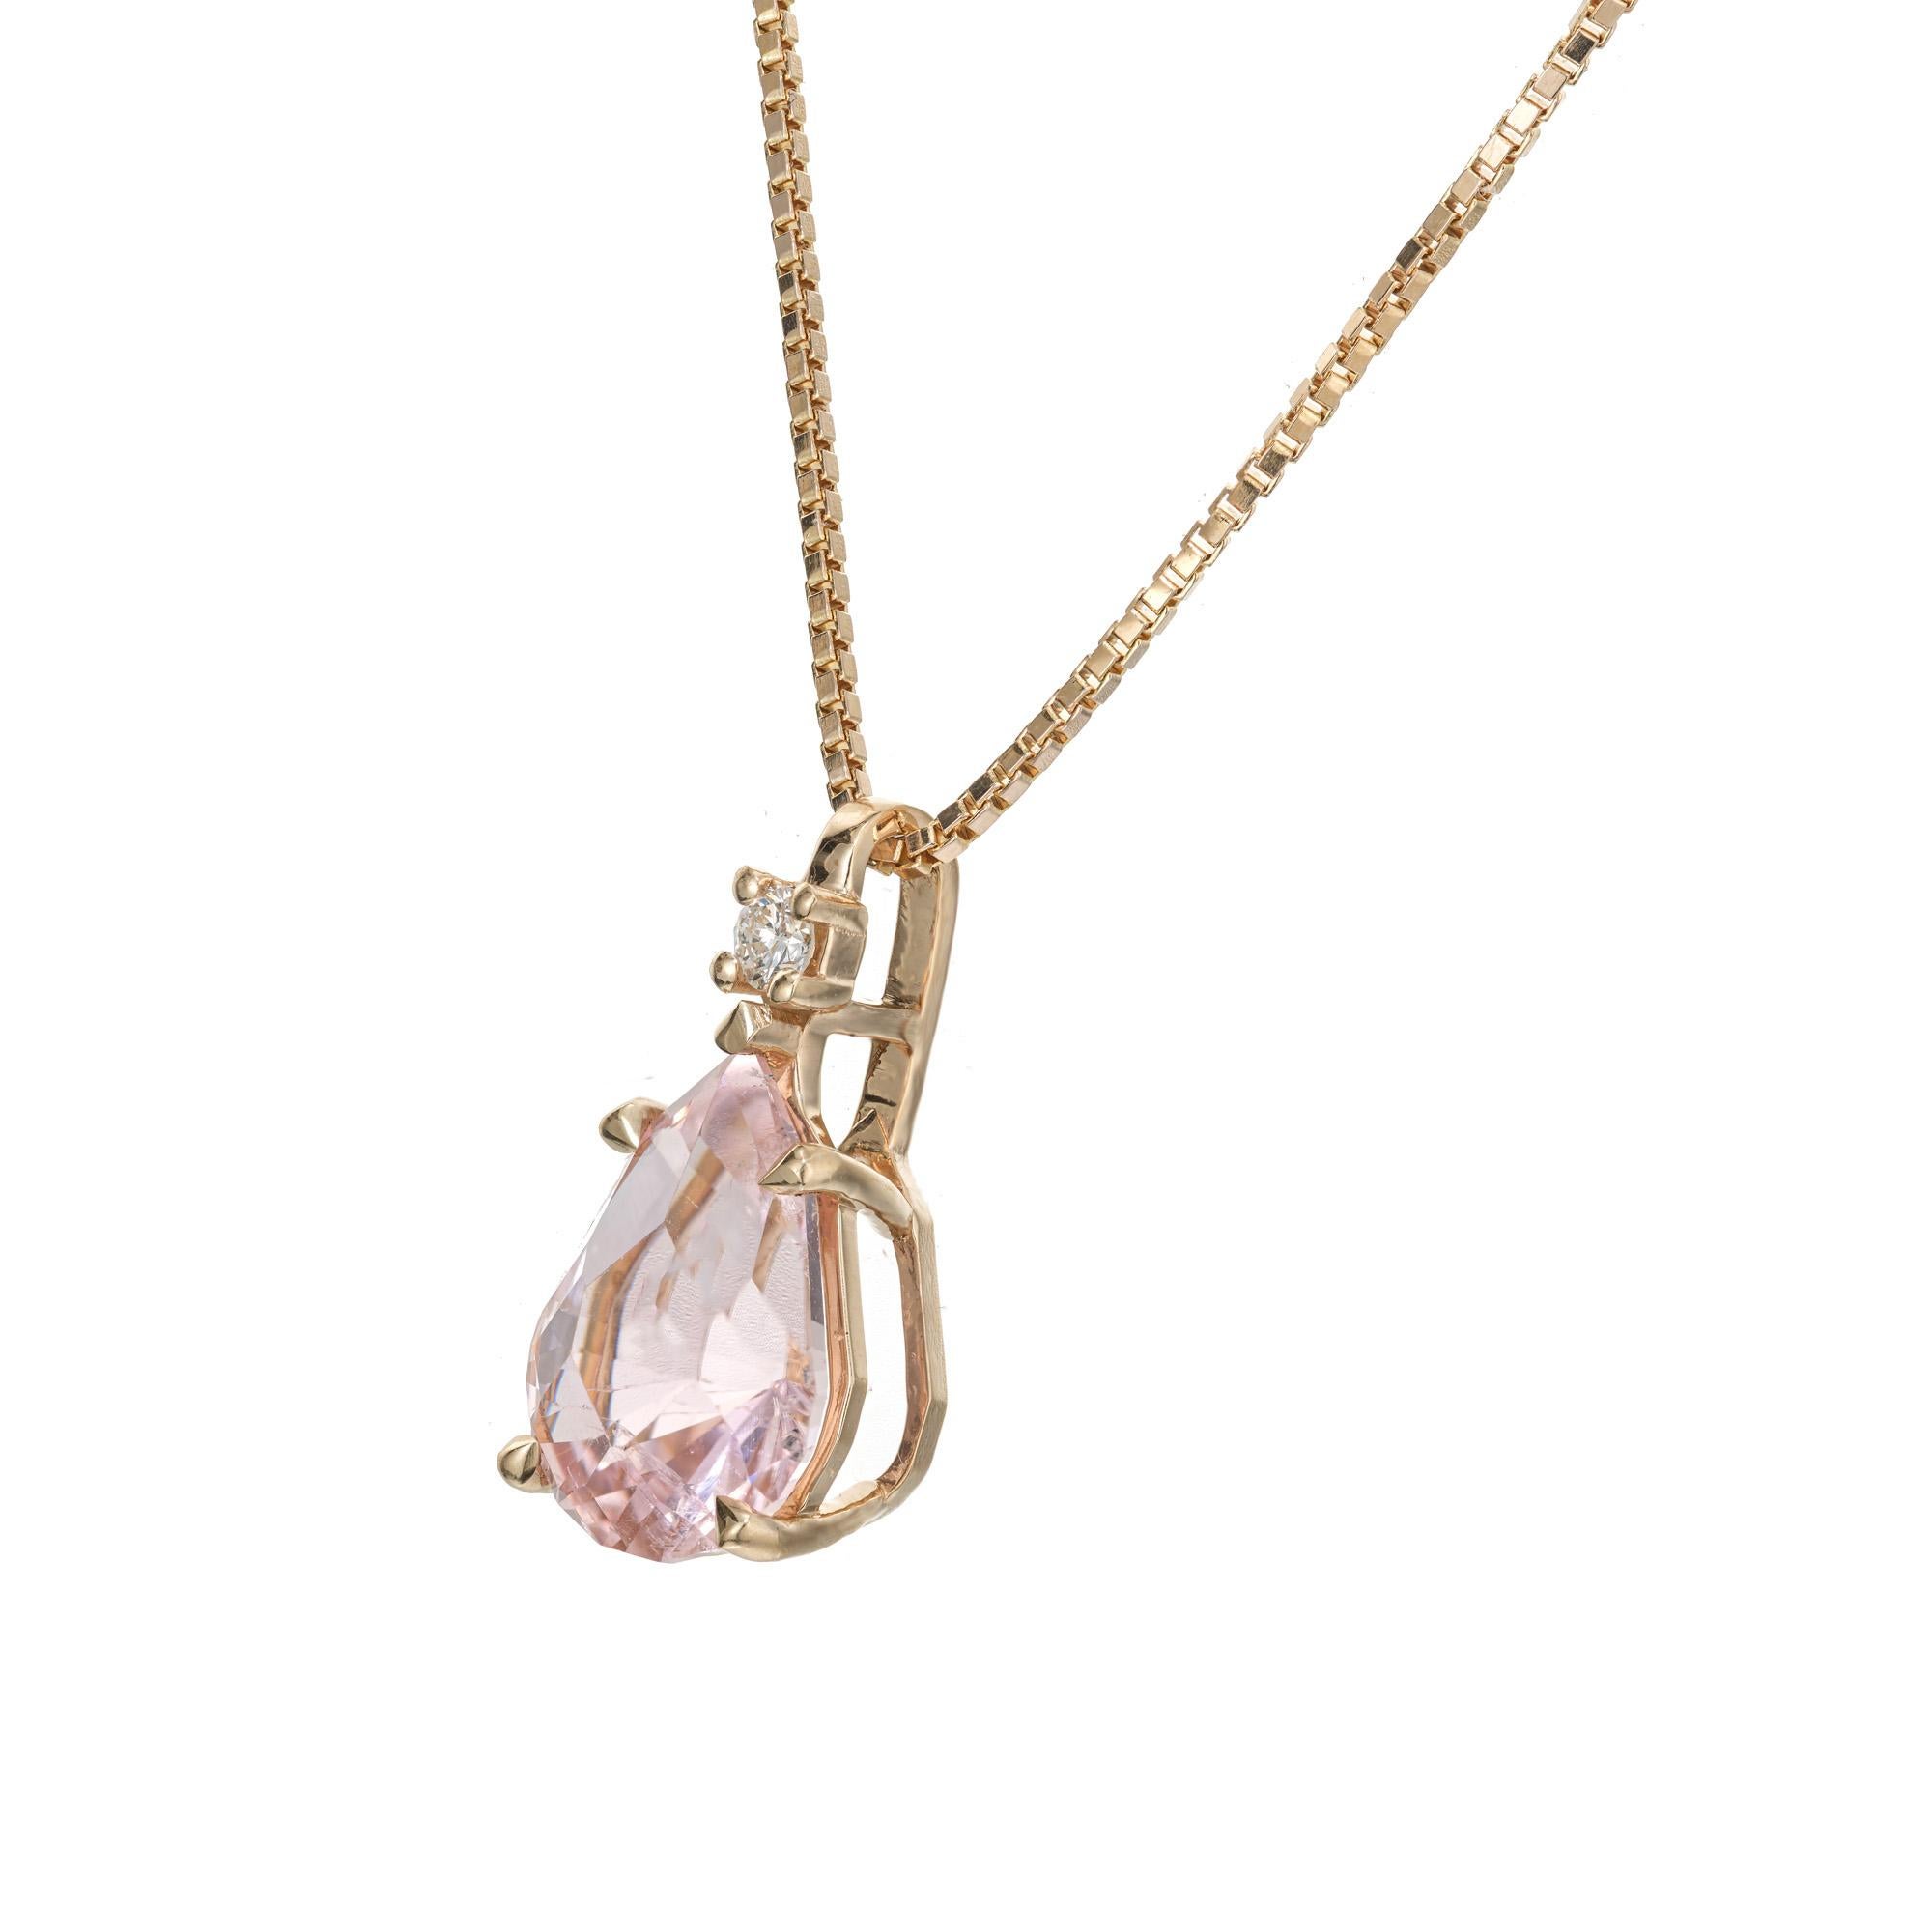 Bright pastel pink natural tourmaline diamond pendant necklace. 3.93ct pear shaped tourmaline with a round cut diamond in a 14k yellow gold setting with a 16 inch 14k yellow gold box necklace. Designed and crafted in the Peter Suchy Workshop

1 pear